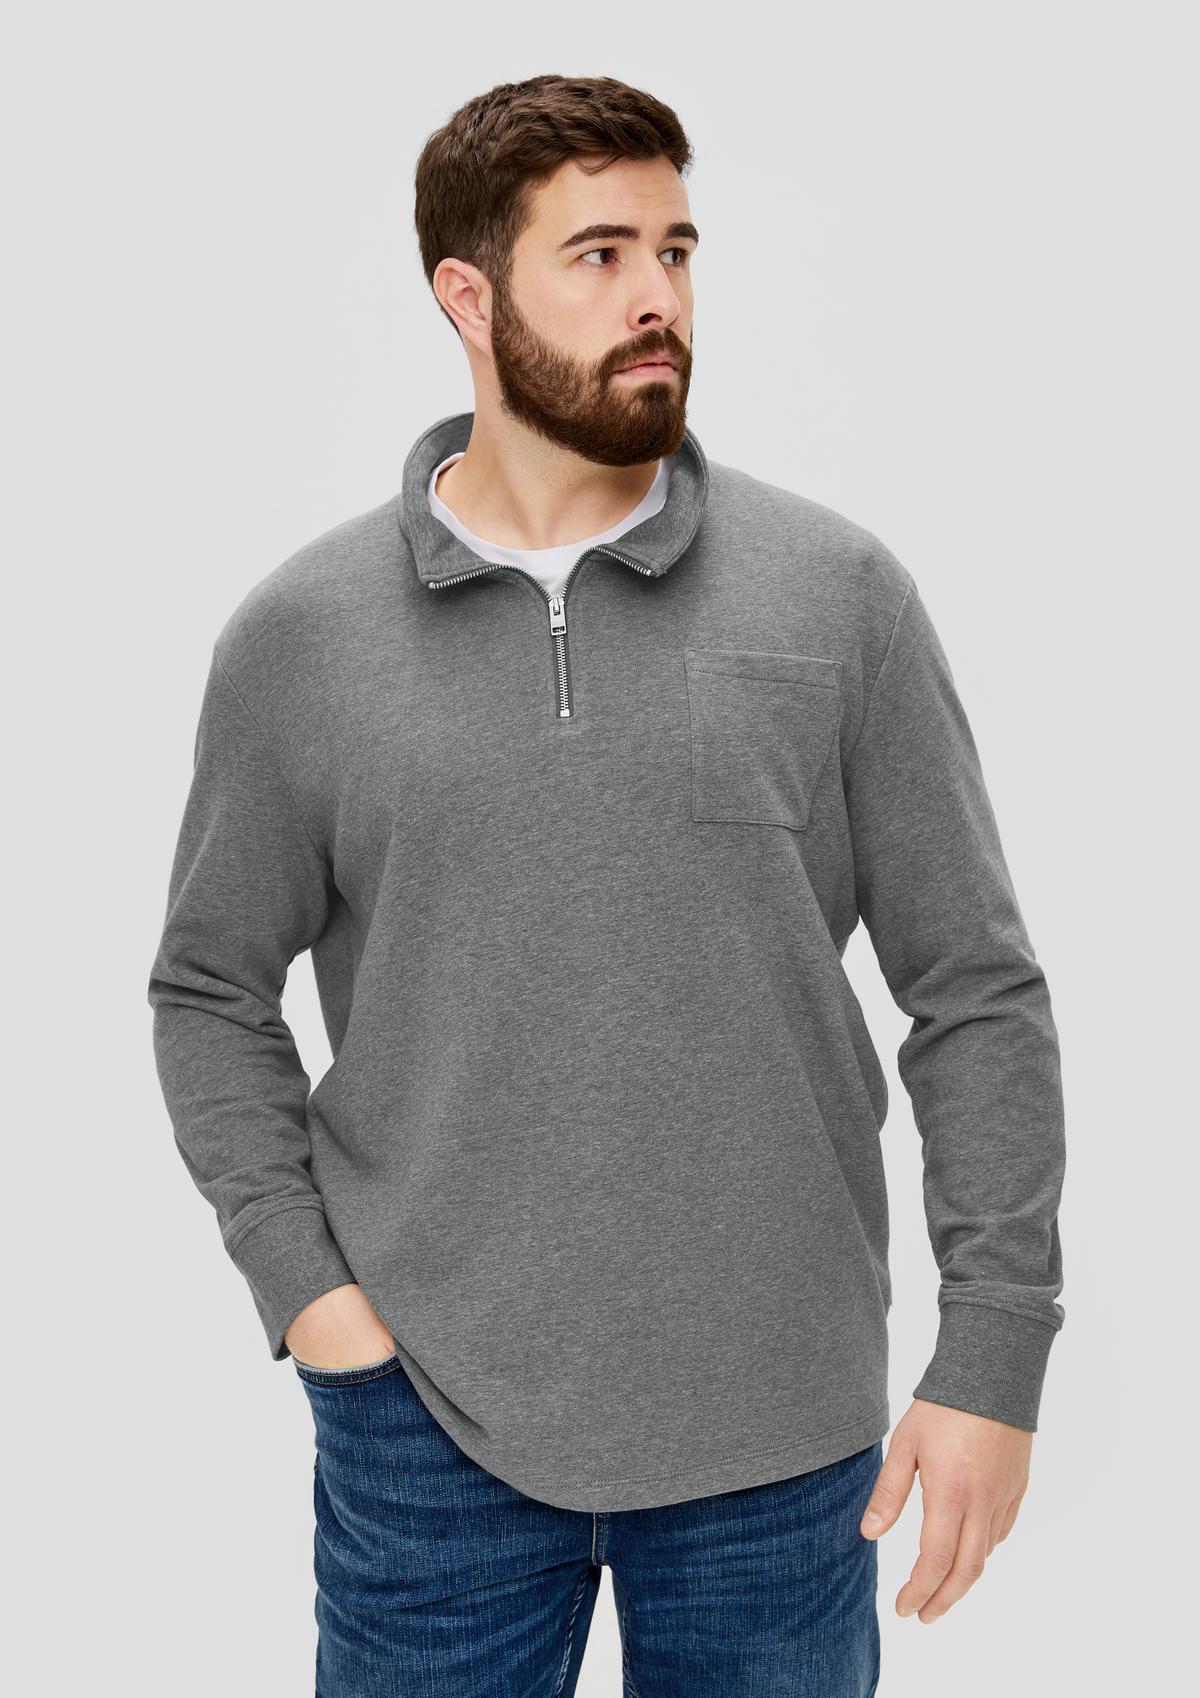 s.Oliver Sweatshirt with a breast pocket